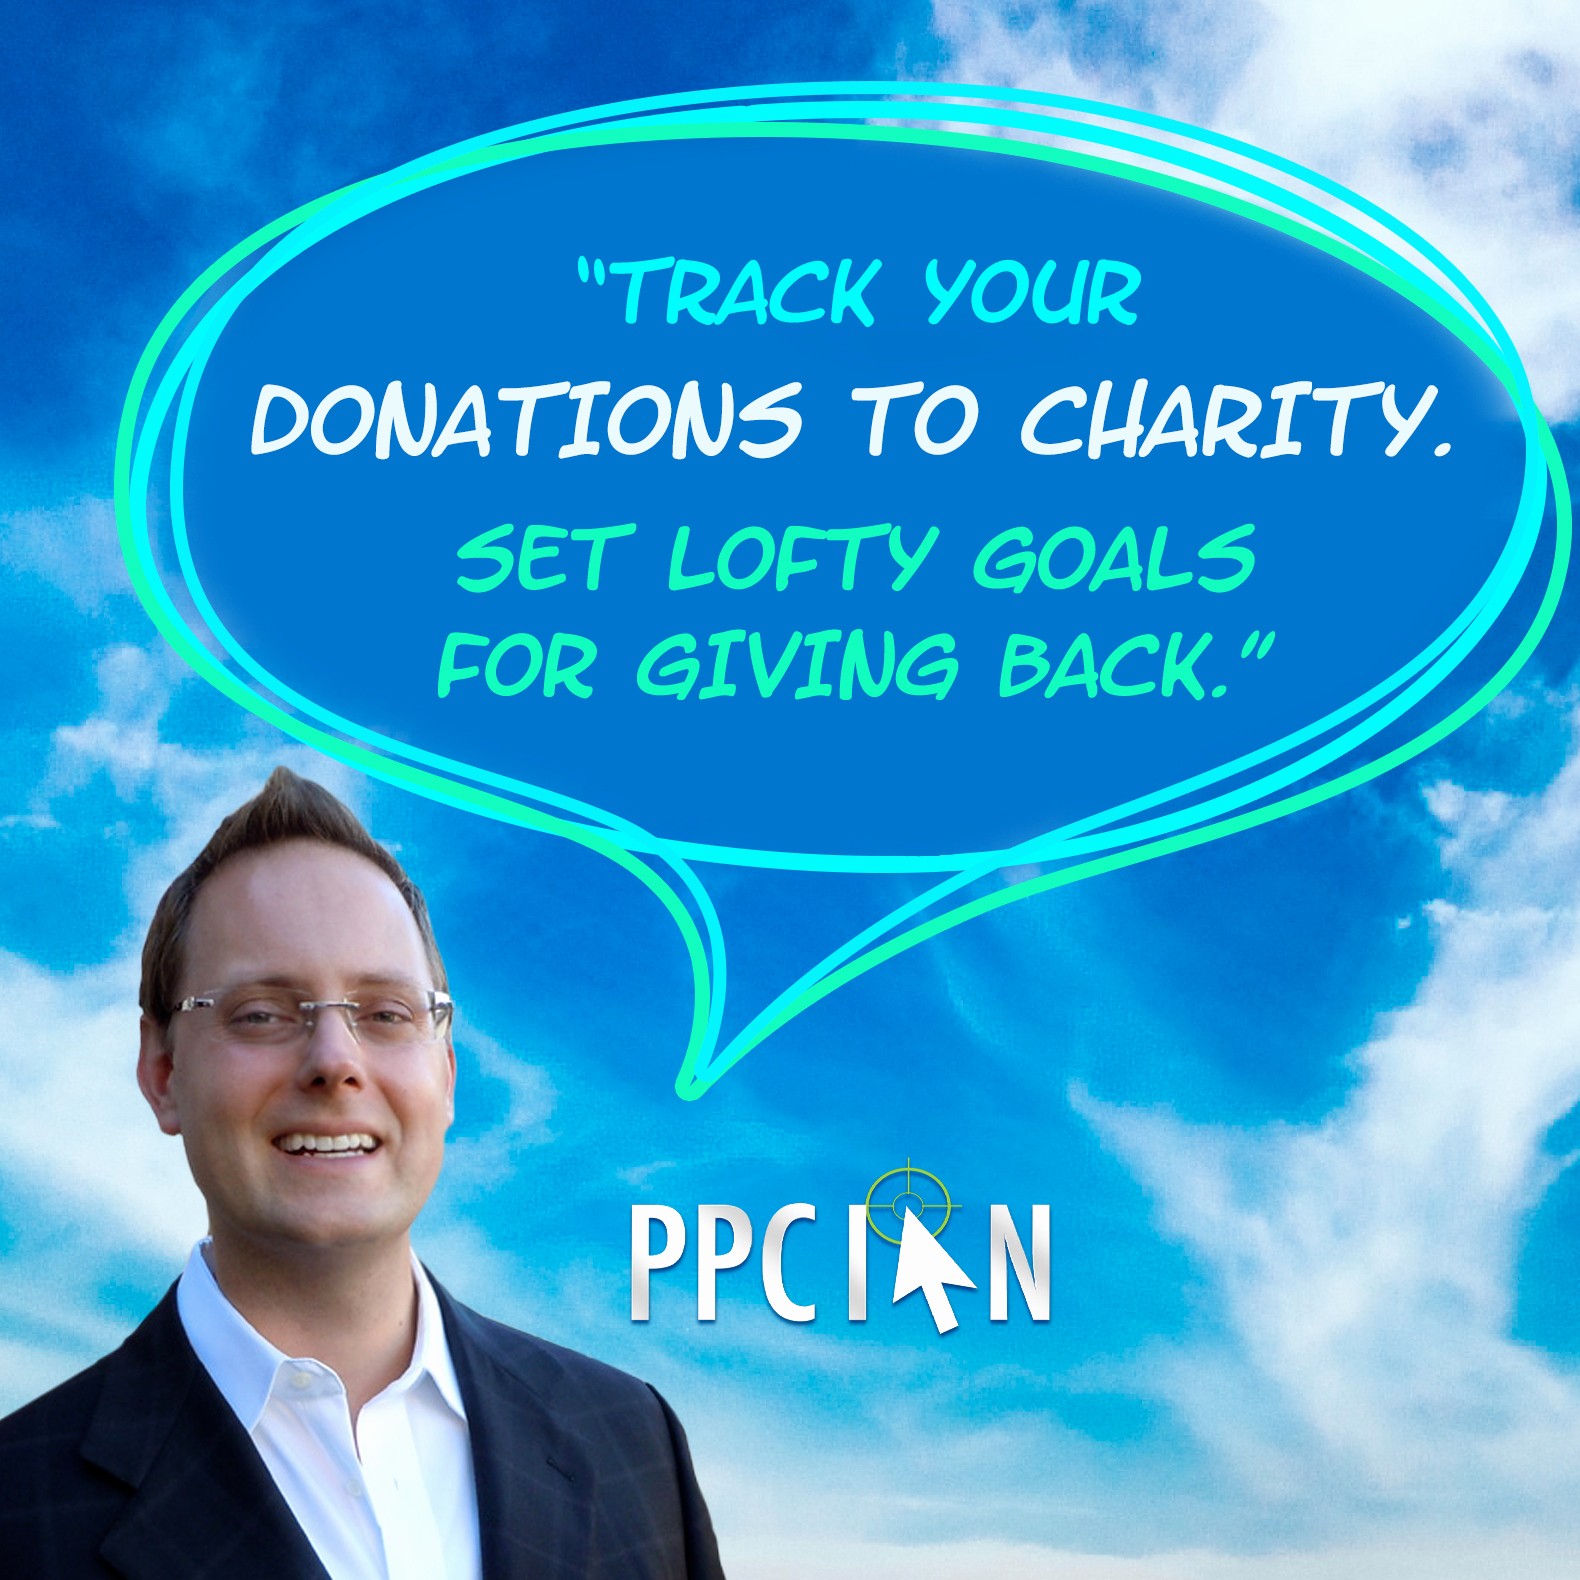 How to Track Charitable Donations Elegant Digital Marketing &amp; Motivational Business Quotes